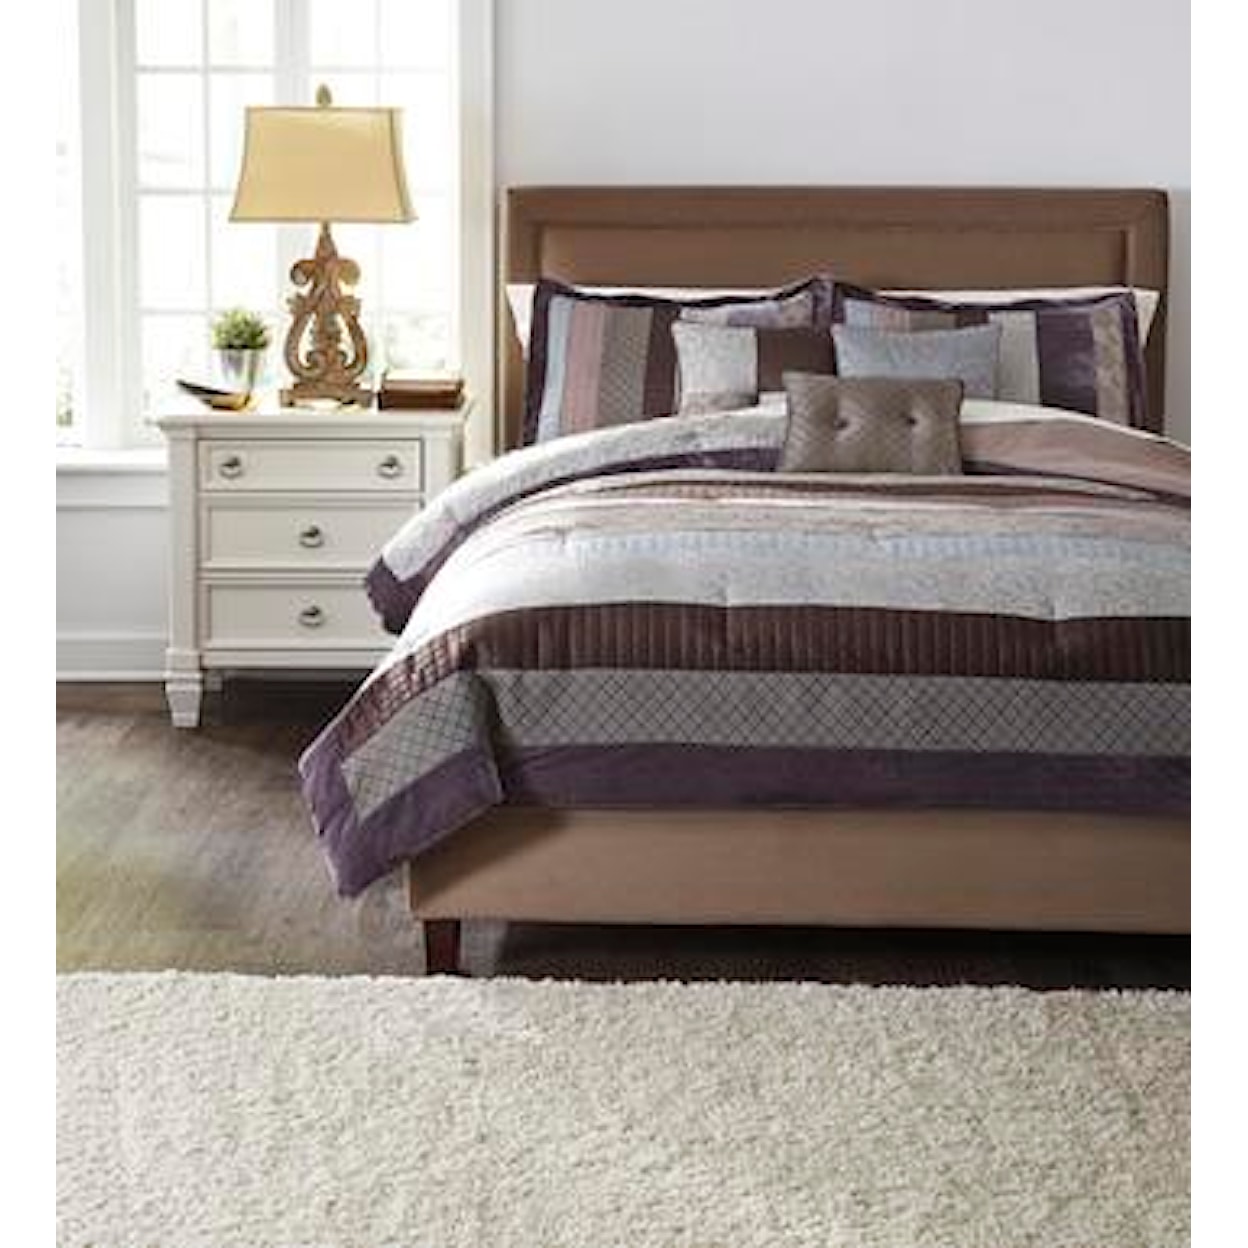 Ashley Furniture Signature Design Bedding Sets Queen Kady Steel Top of Bed Set